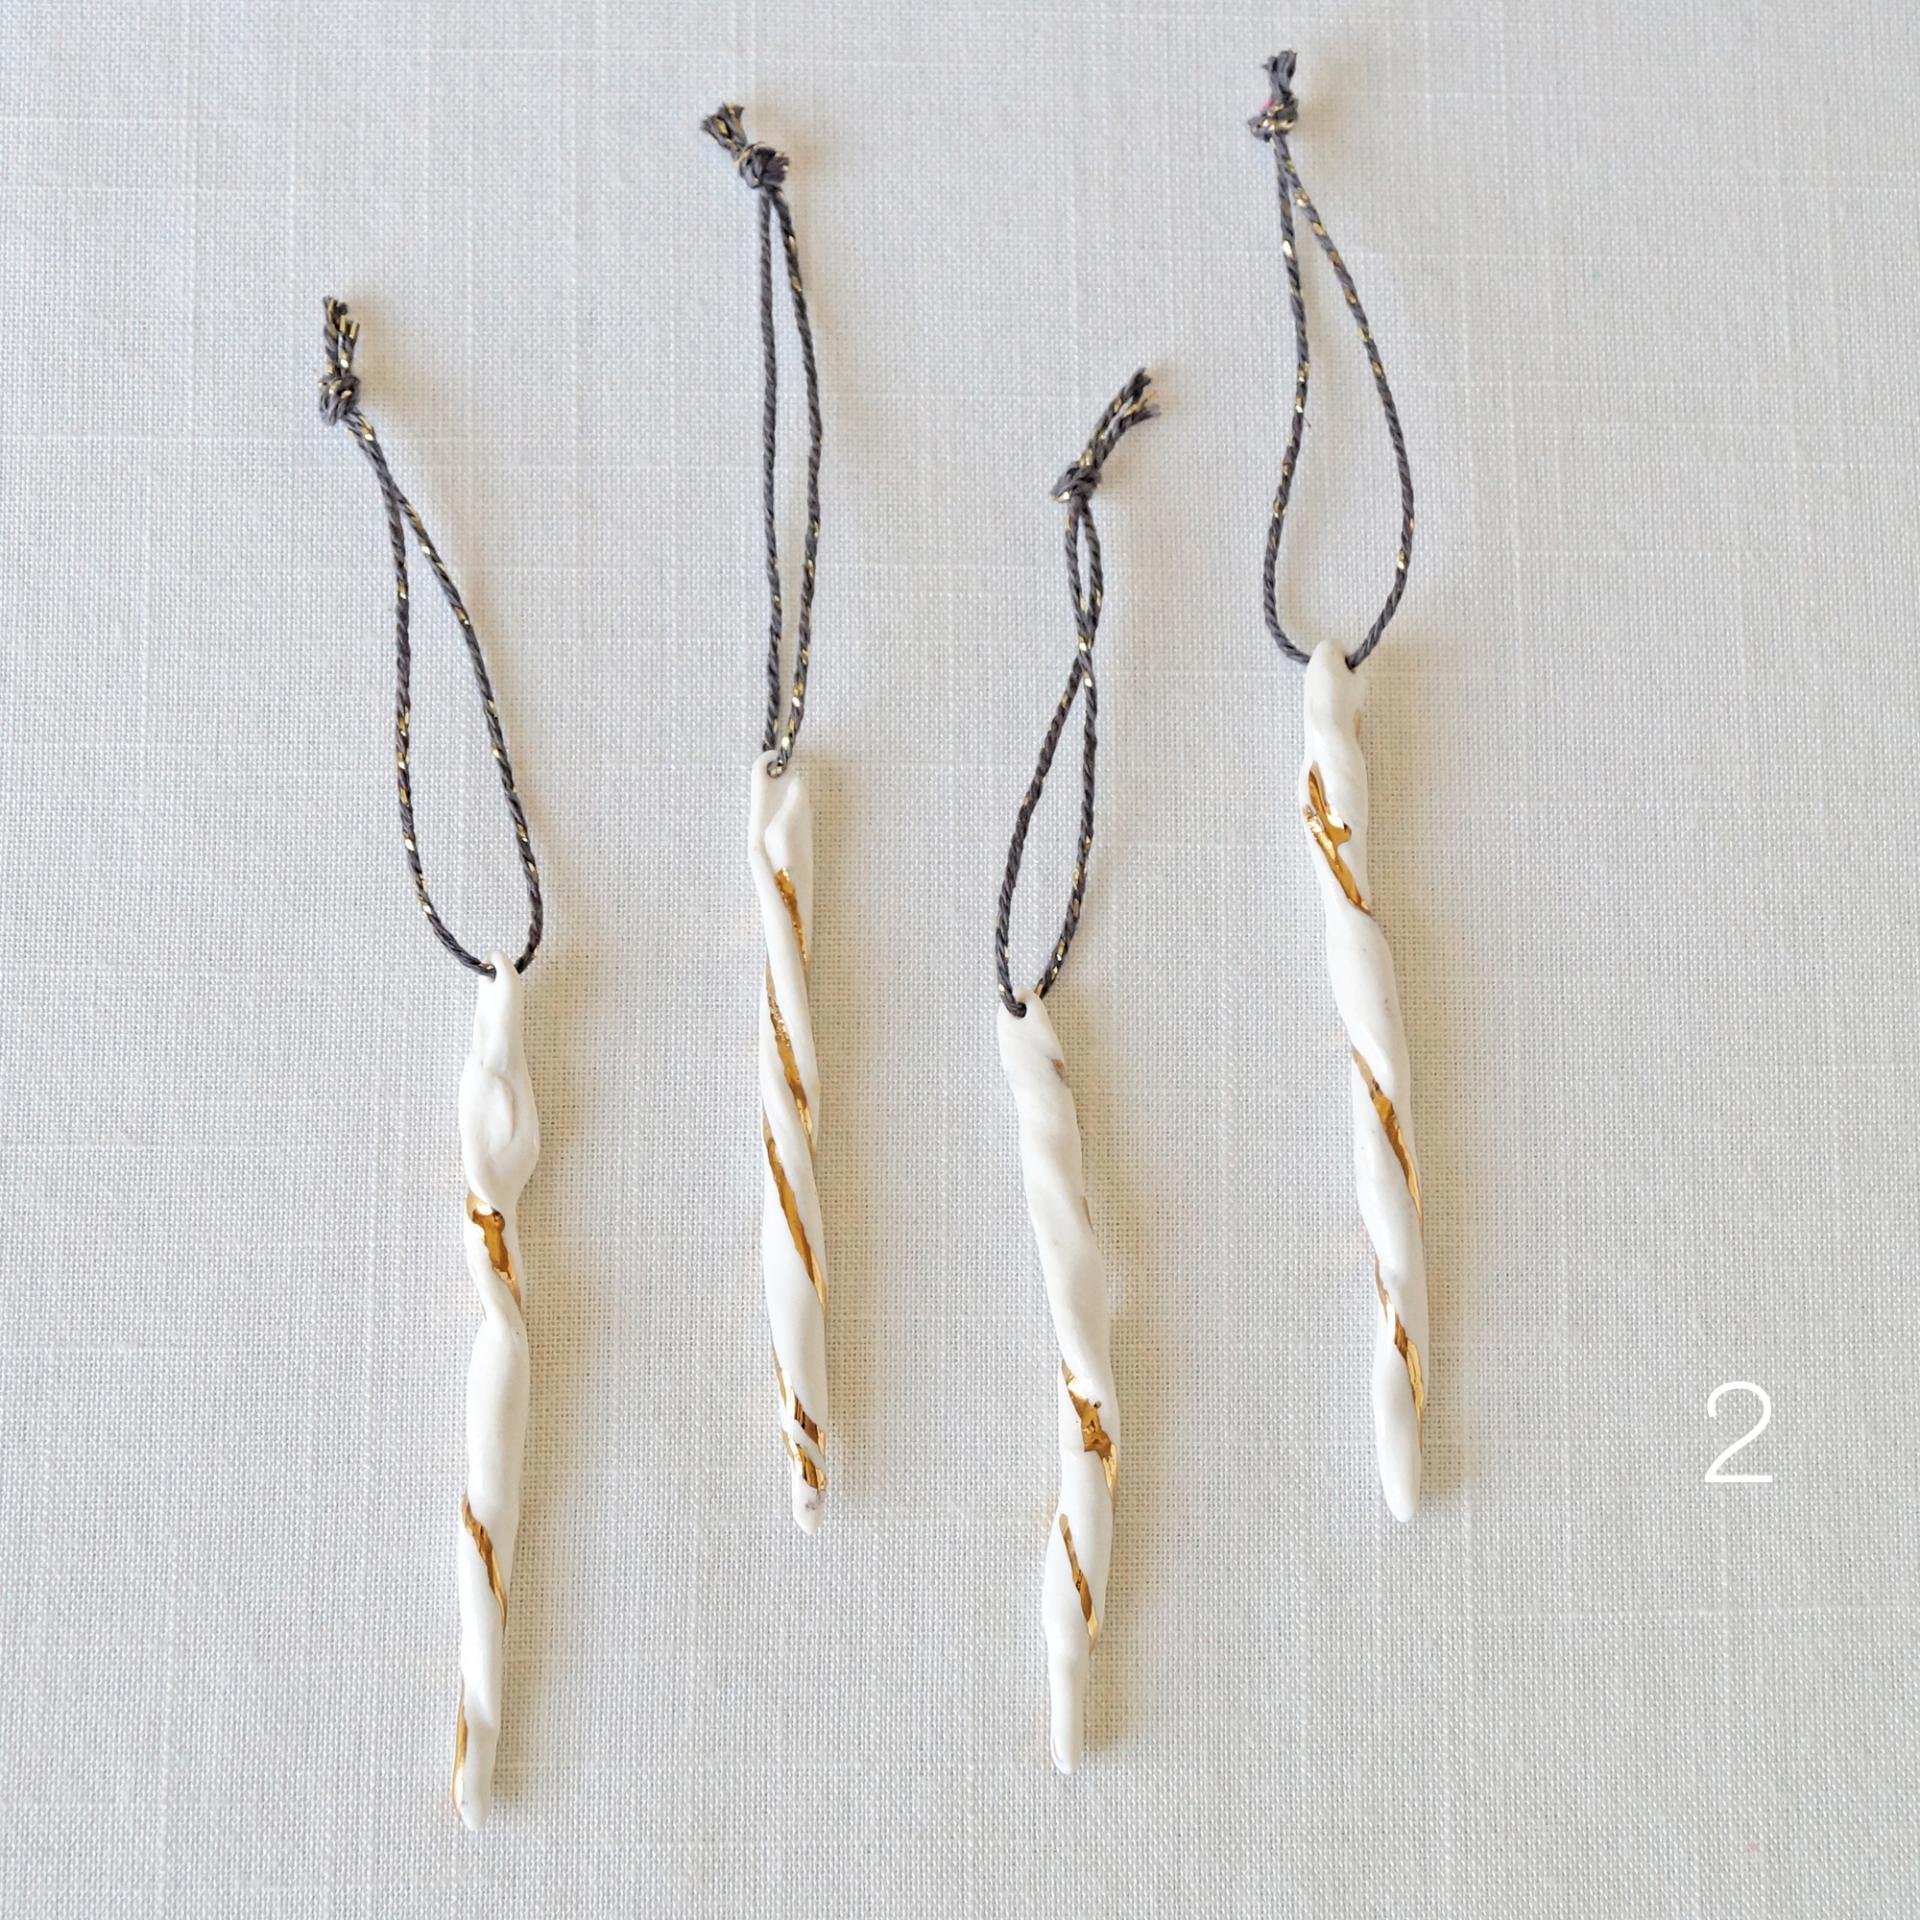 Christmas tree TWISTS, white porcelain, gold lustre, Christmas, tree decorations set, dark grey, speckled gold, grey cord, ha